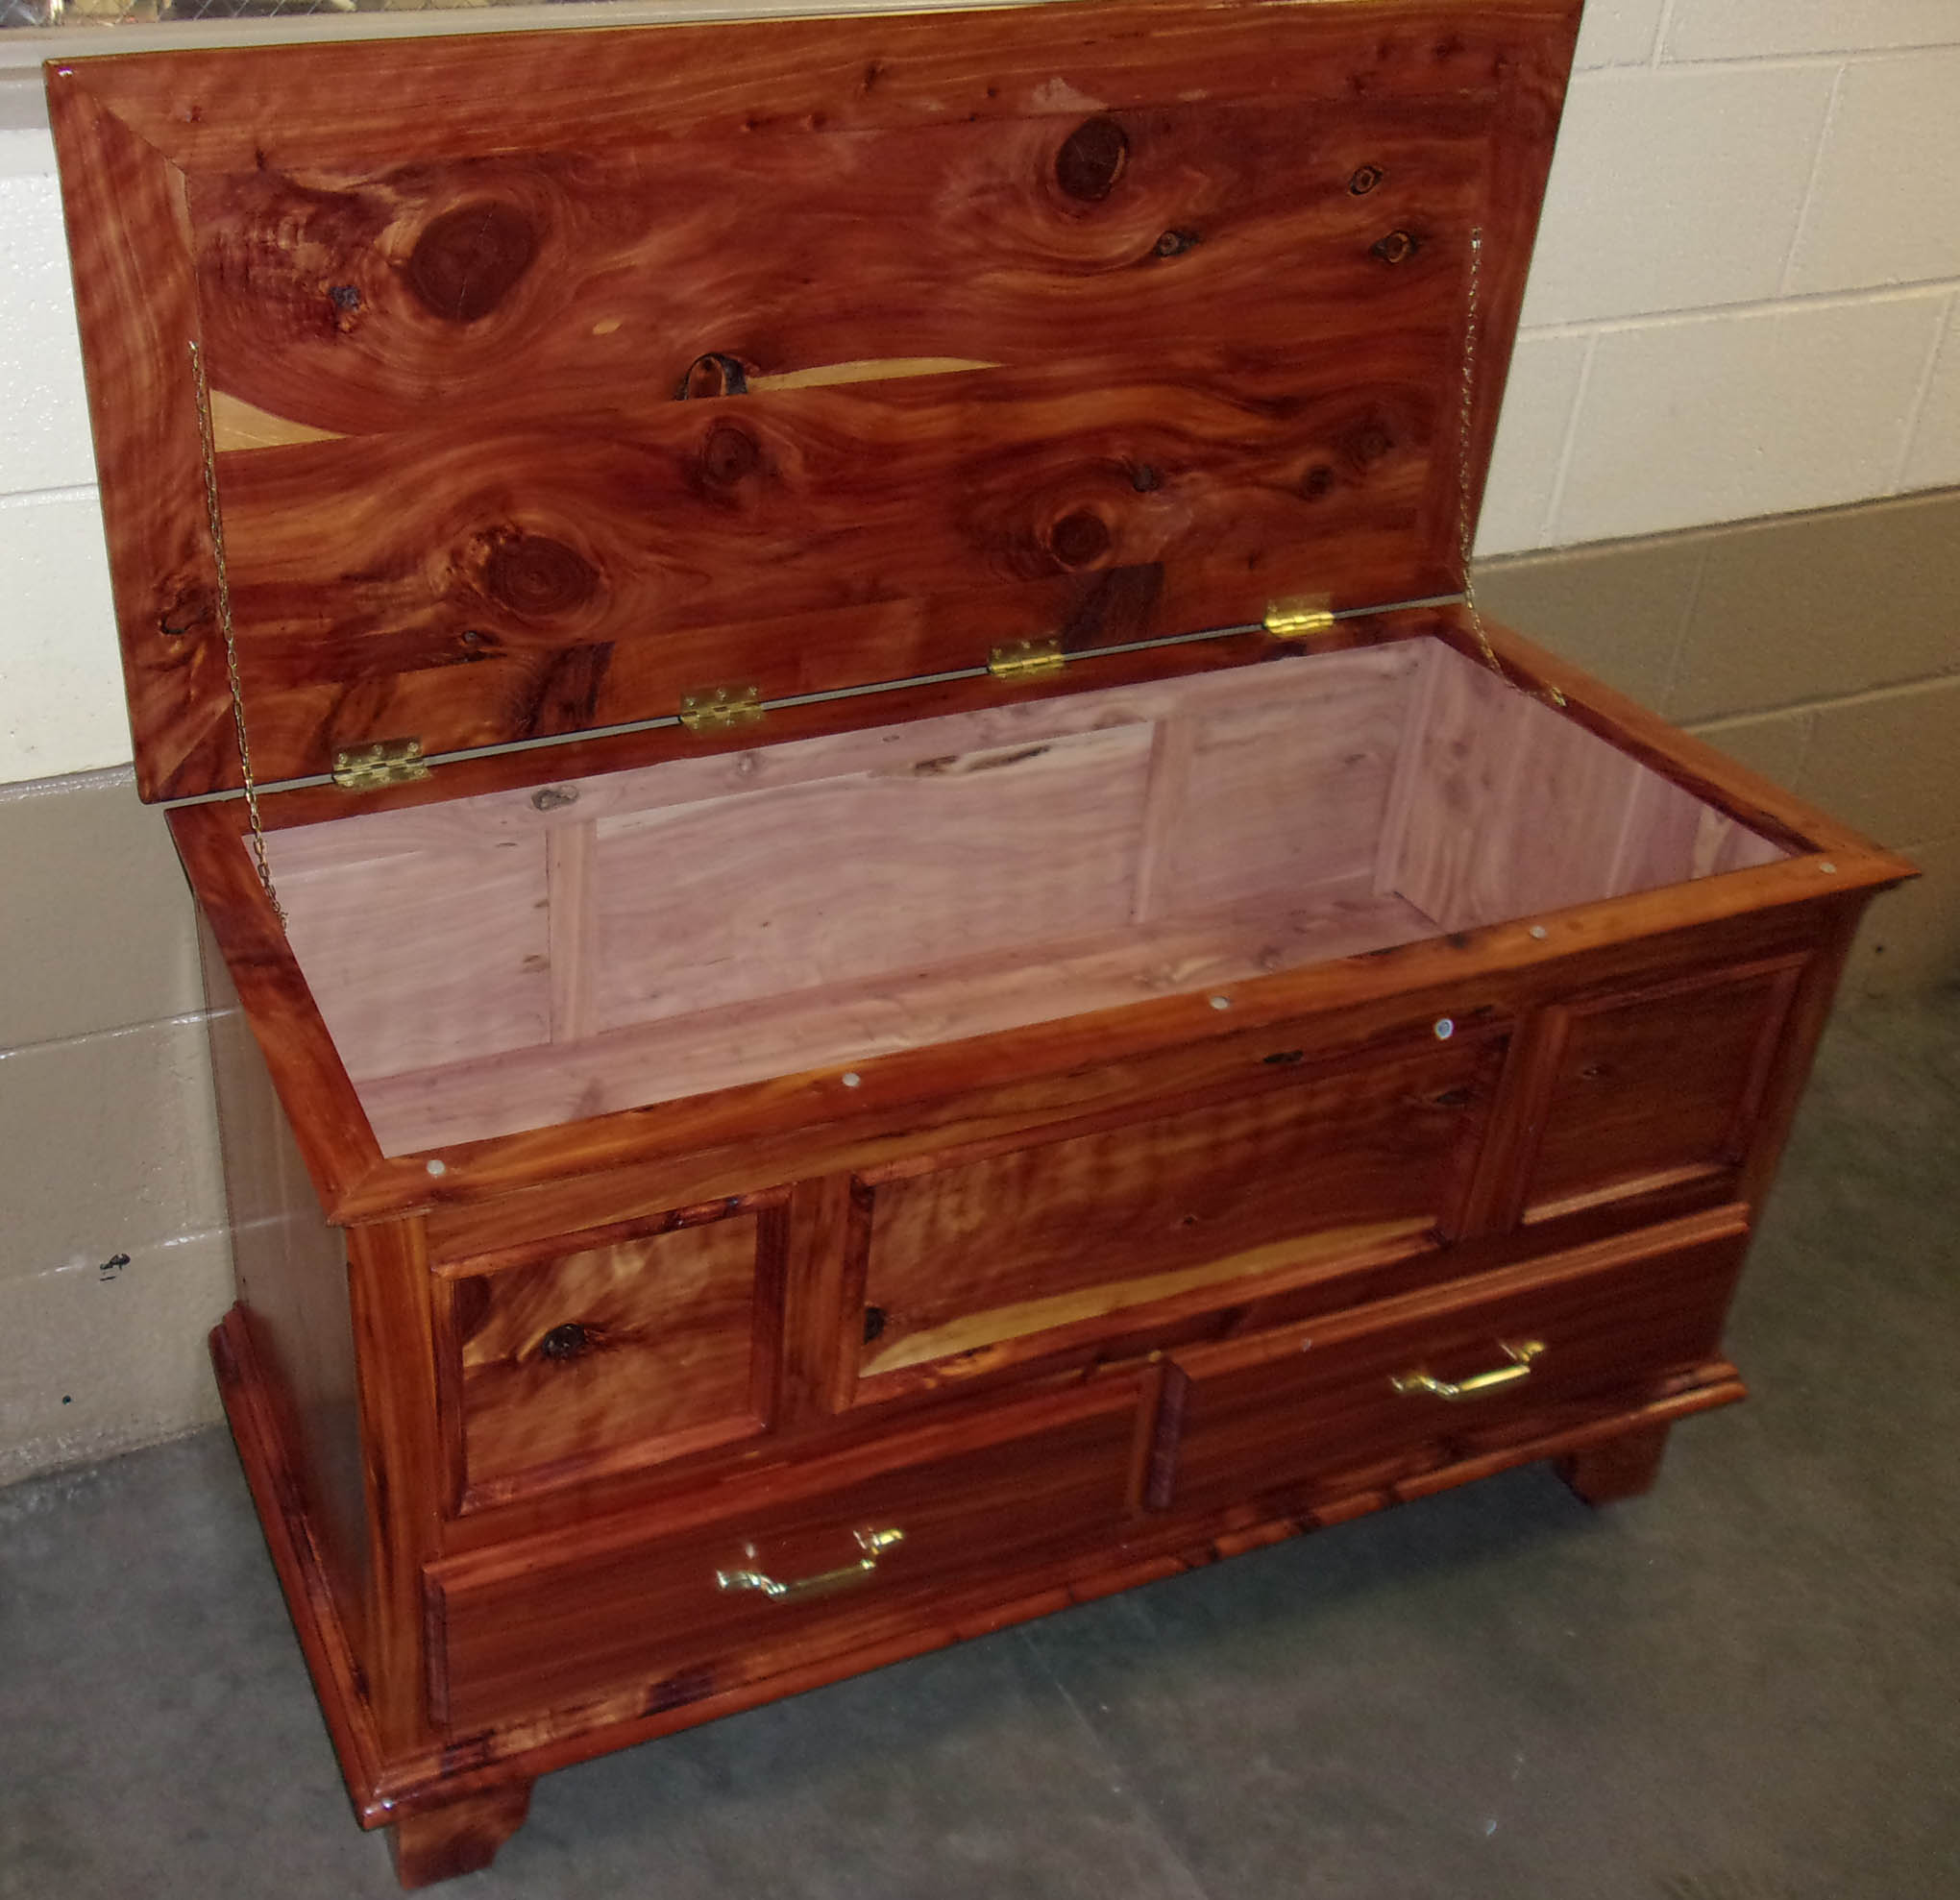 Click to enlarge,  This cedar chest will be among the items up for bid at the Central Carolina Community College Foundation's 19th Annual Furniture Auction Saturday, June 1, in the Multipurpose Room of the Miriello Building on the college's Harnett County Campus, 1075 E. Cornelius Harnett Blvd. Viewing and registration starts at 9 a.m. and bidding at 10 a.m. For more information about the CCCC Foundation Furniture Auction, call 910-893-9101 or go online to www.cccc.edu/auction to see a photo gallery of the auction pieces. 